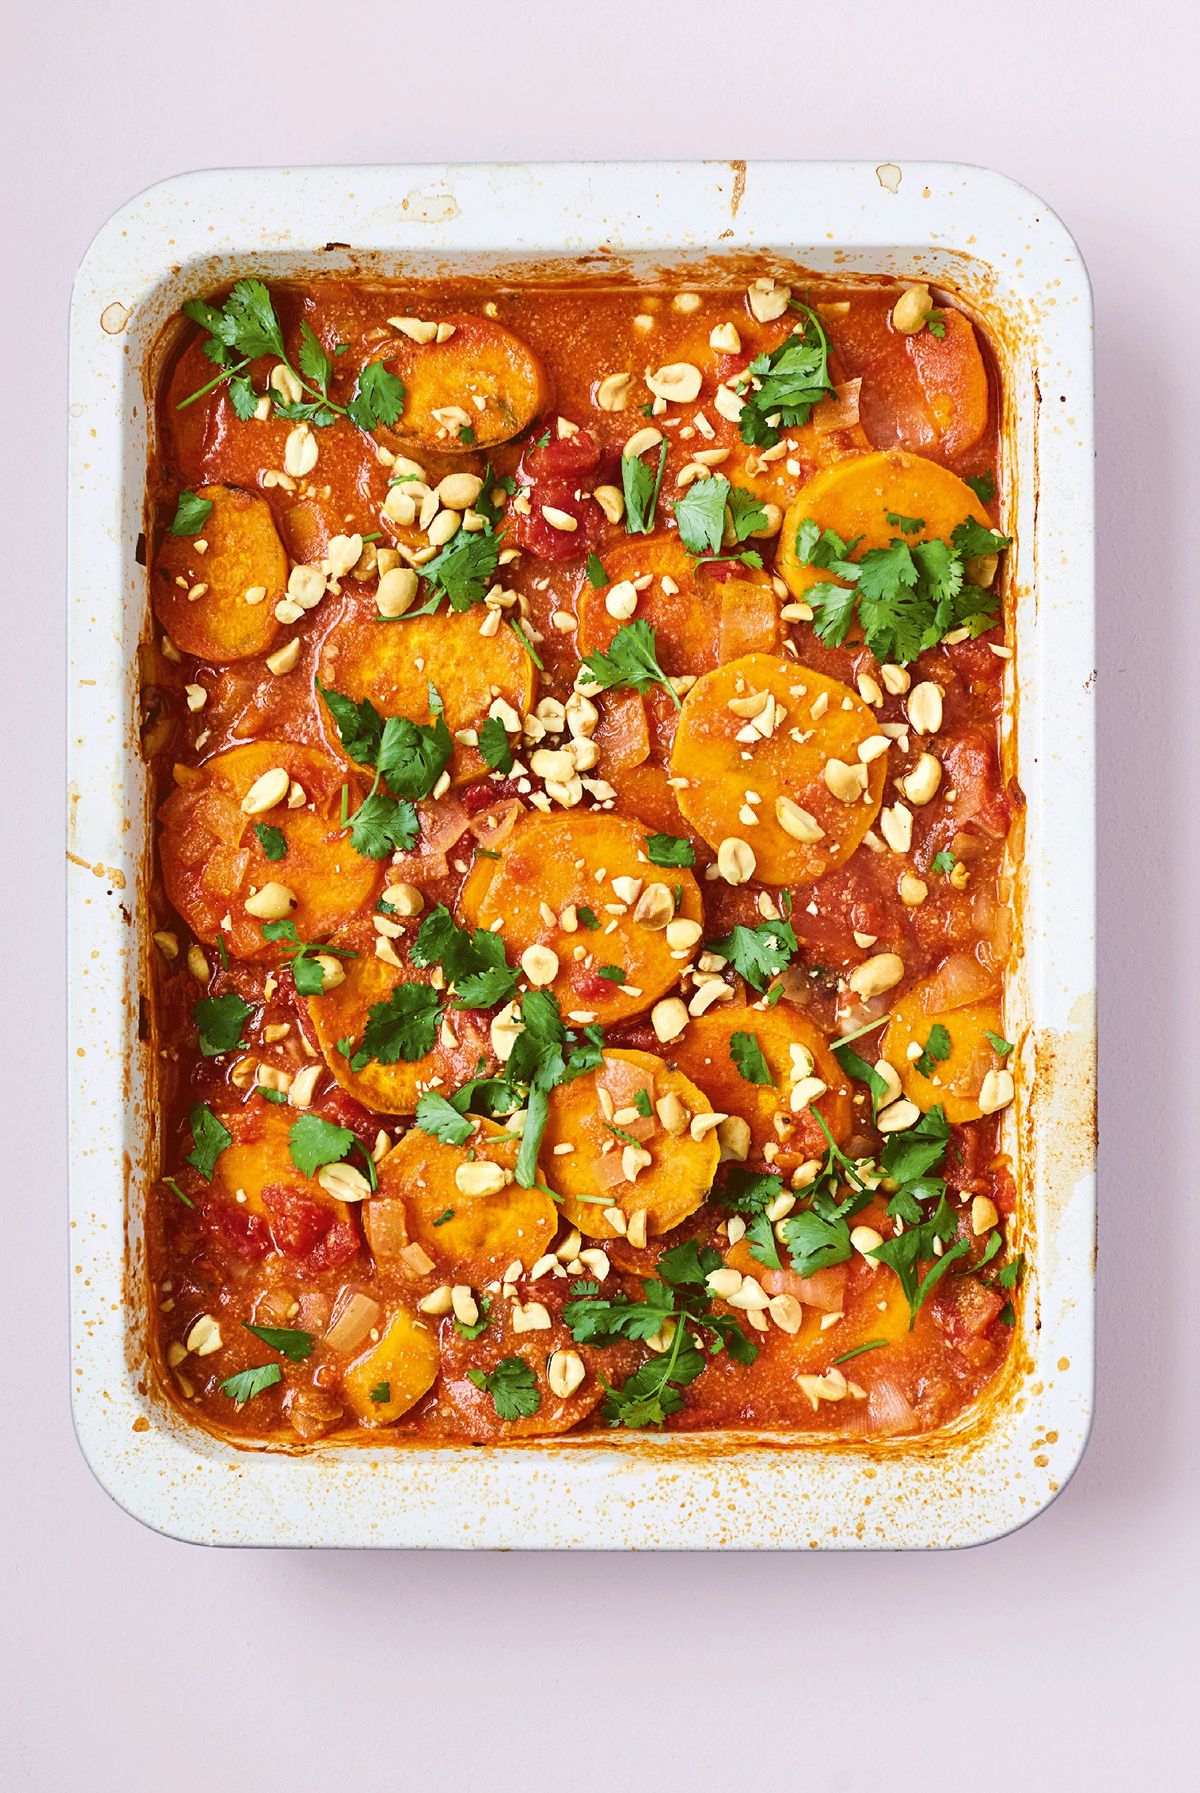 Groundnut Stew: Sweet Potato in a Peanut and Tomato Sauce